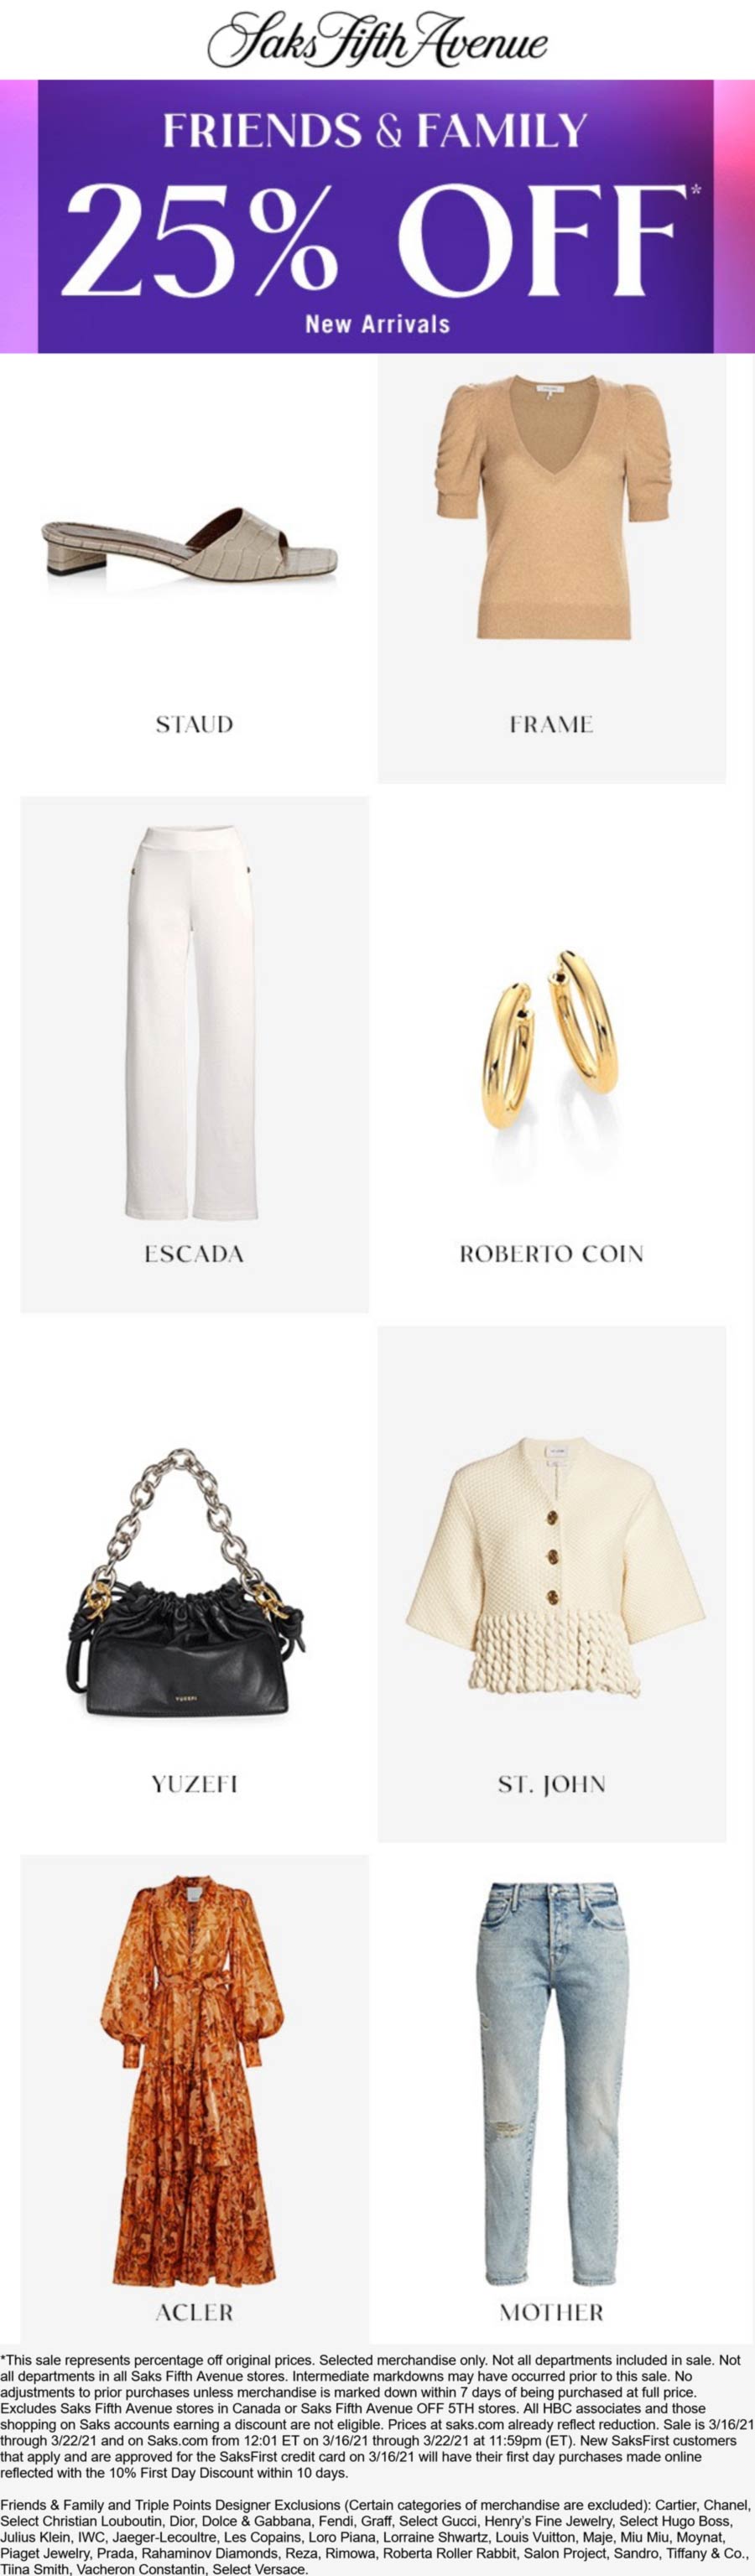 25 off new arrivals at Saks Fifth Avenue, ditto online 